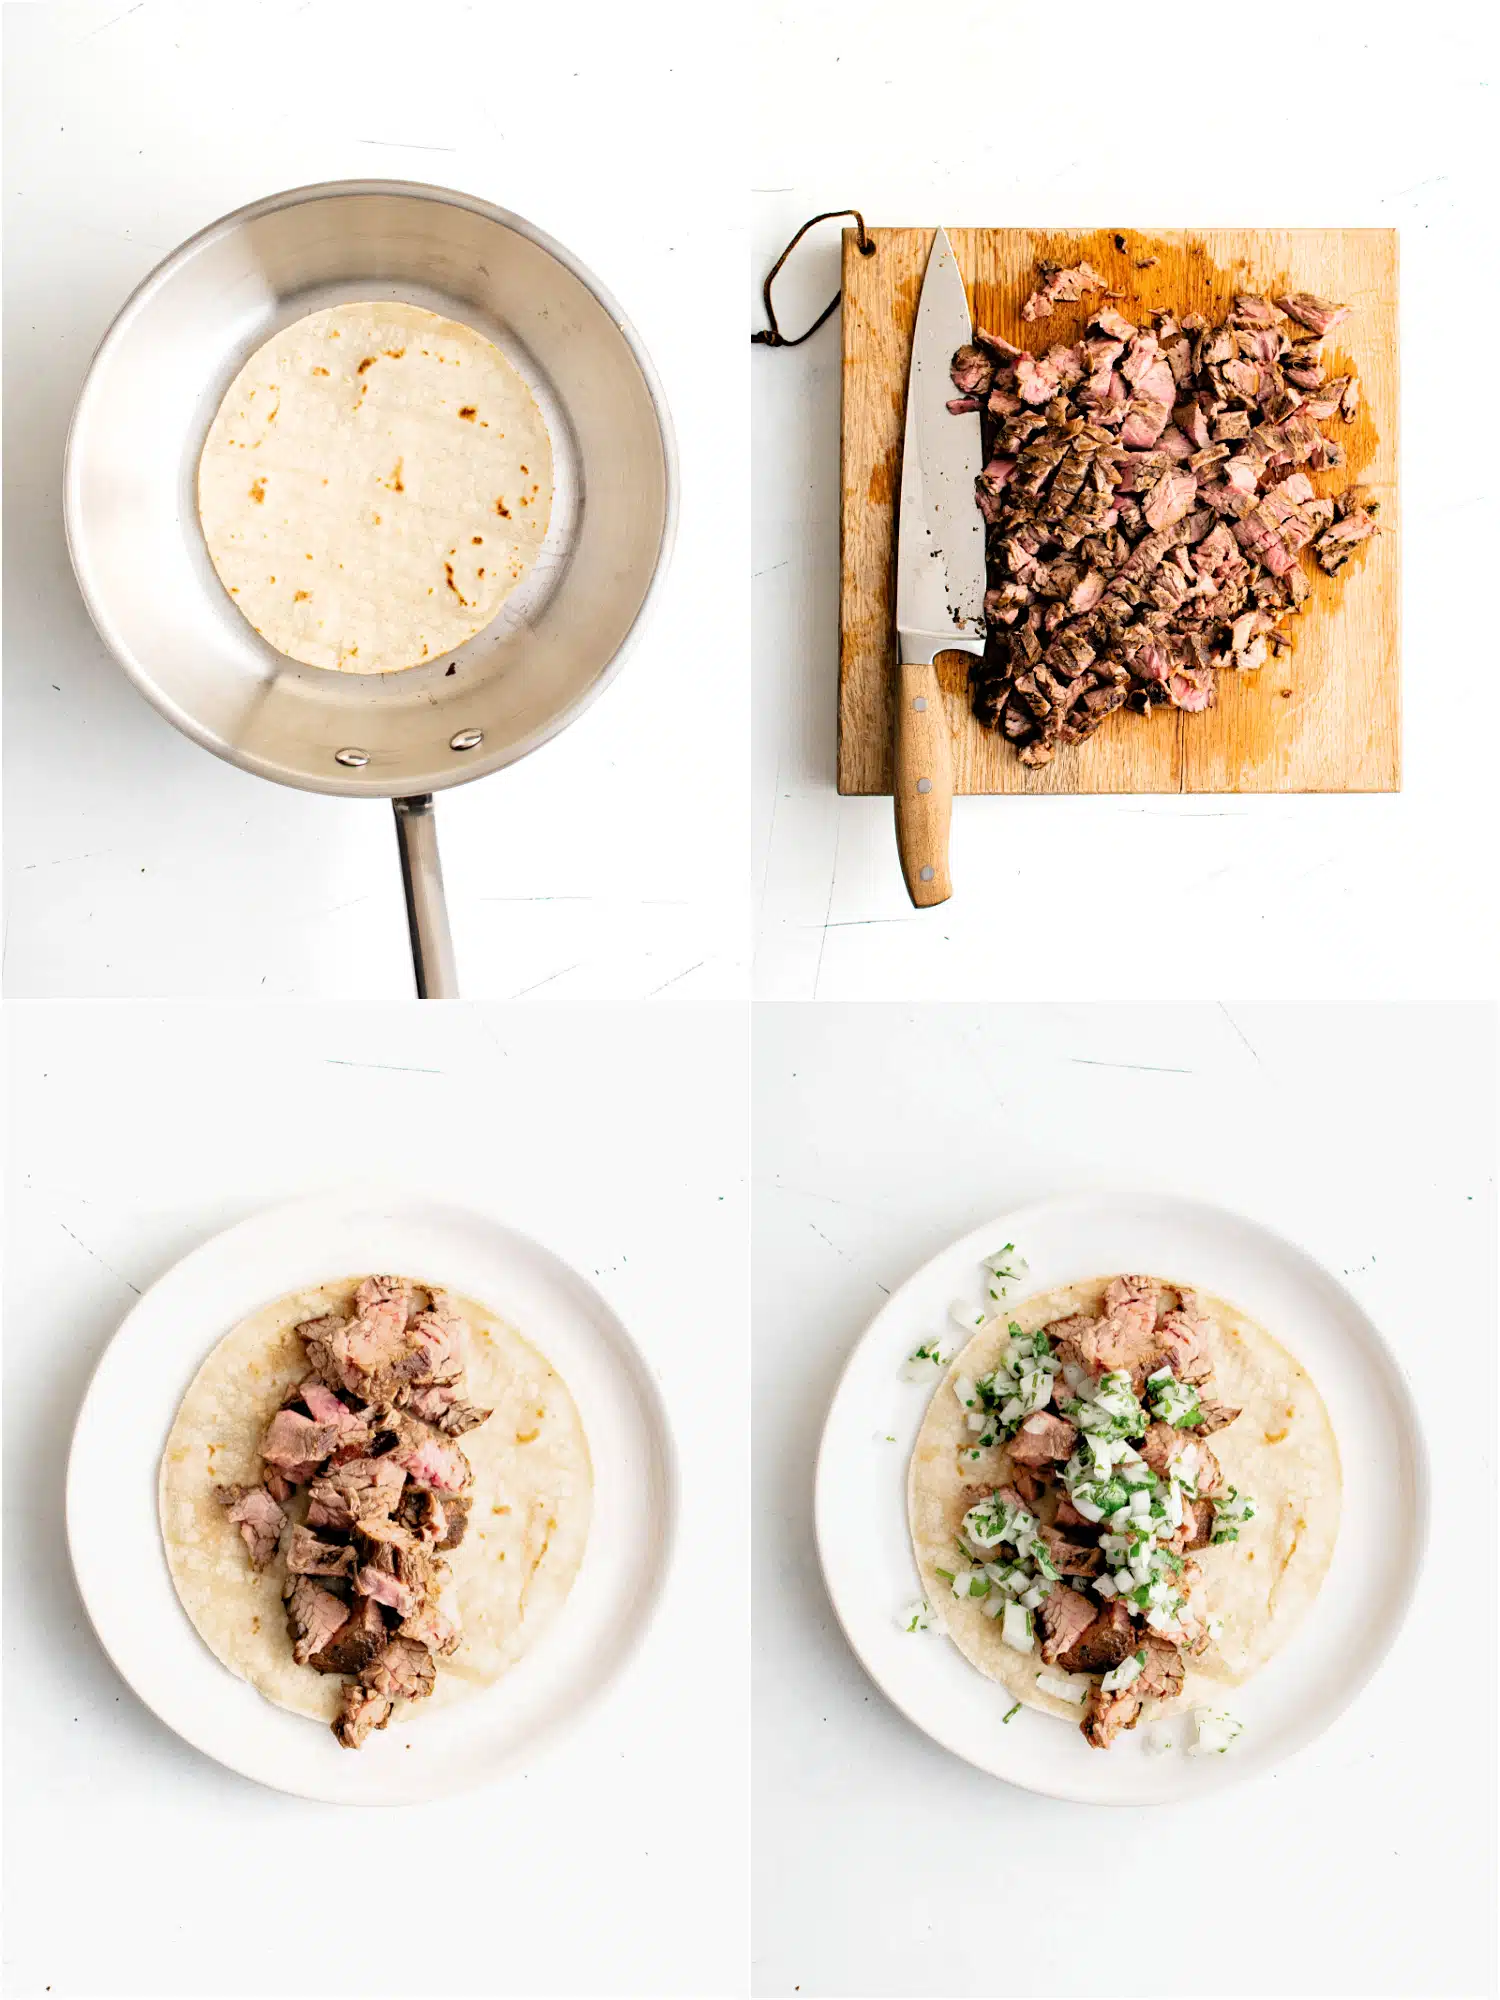 Four images in a collage. The first image shows a tortilla warming in a skillet; the second image shows a cutting board filled with chopped carne asada; the third image shows a warm corn tortilla on a white plate topped with carne asada; the fourth image shows a corn tortilla on a white plate topped with carne asada and homemade salsa.